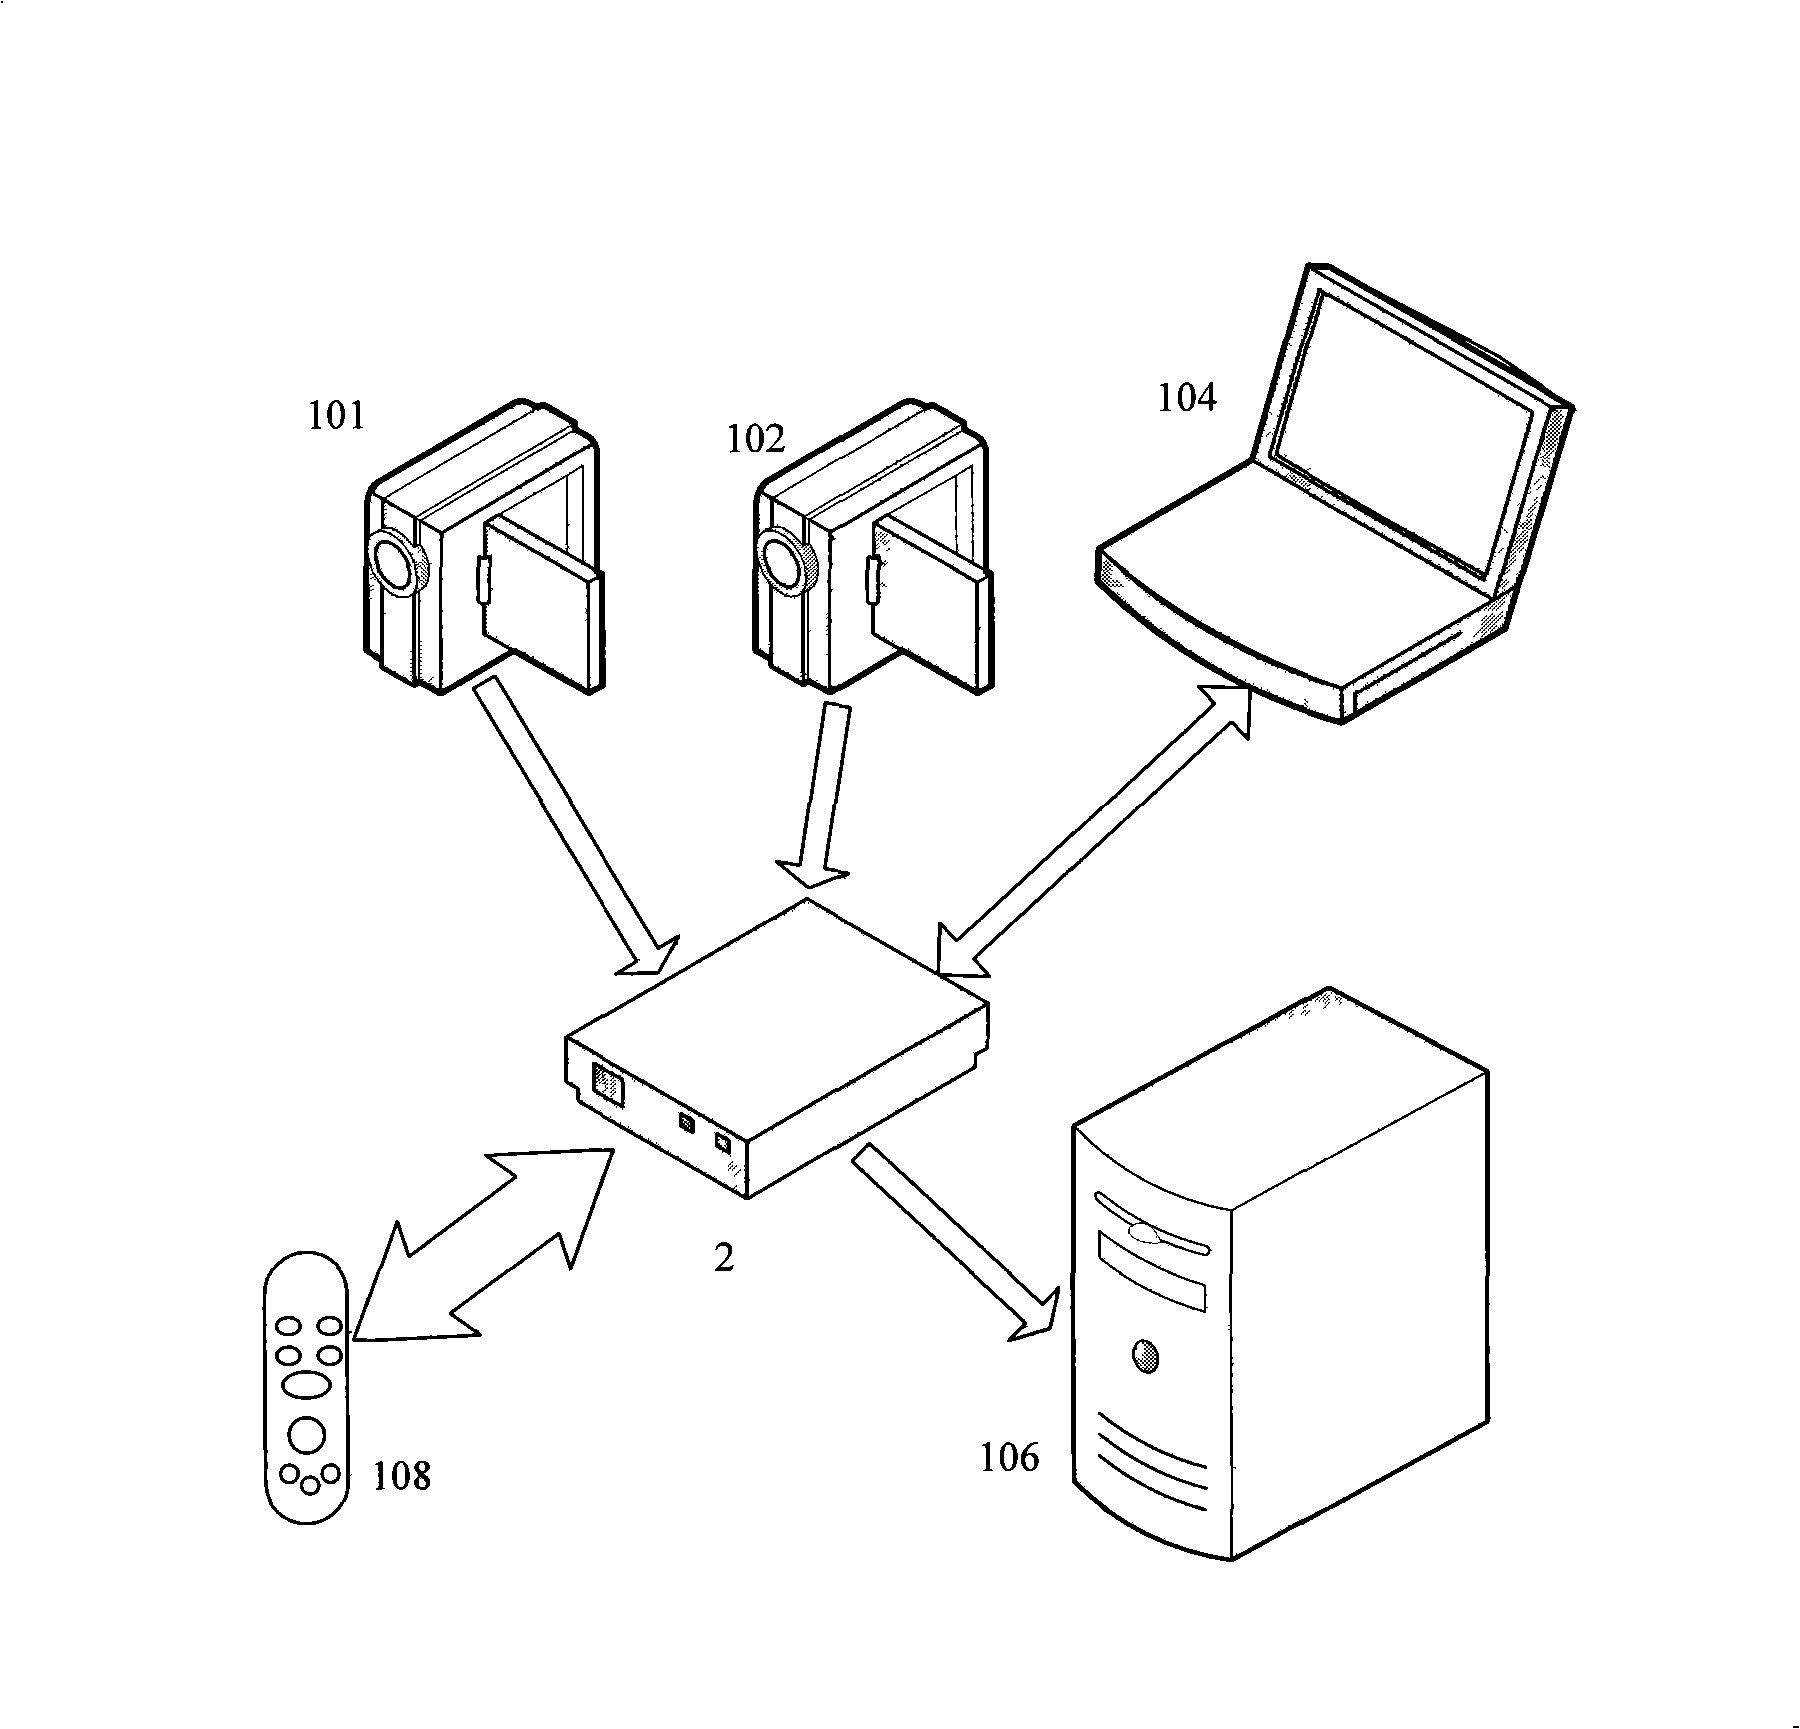 Recording system and method used for teaching and meeting place